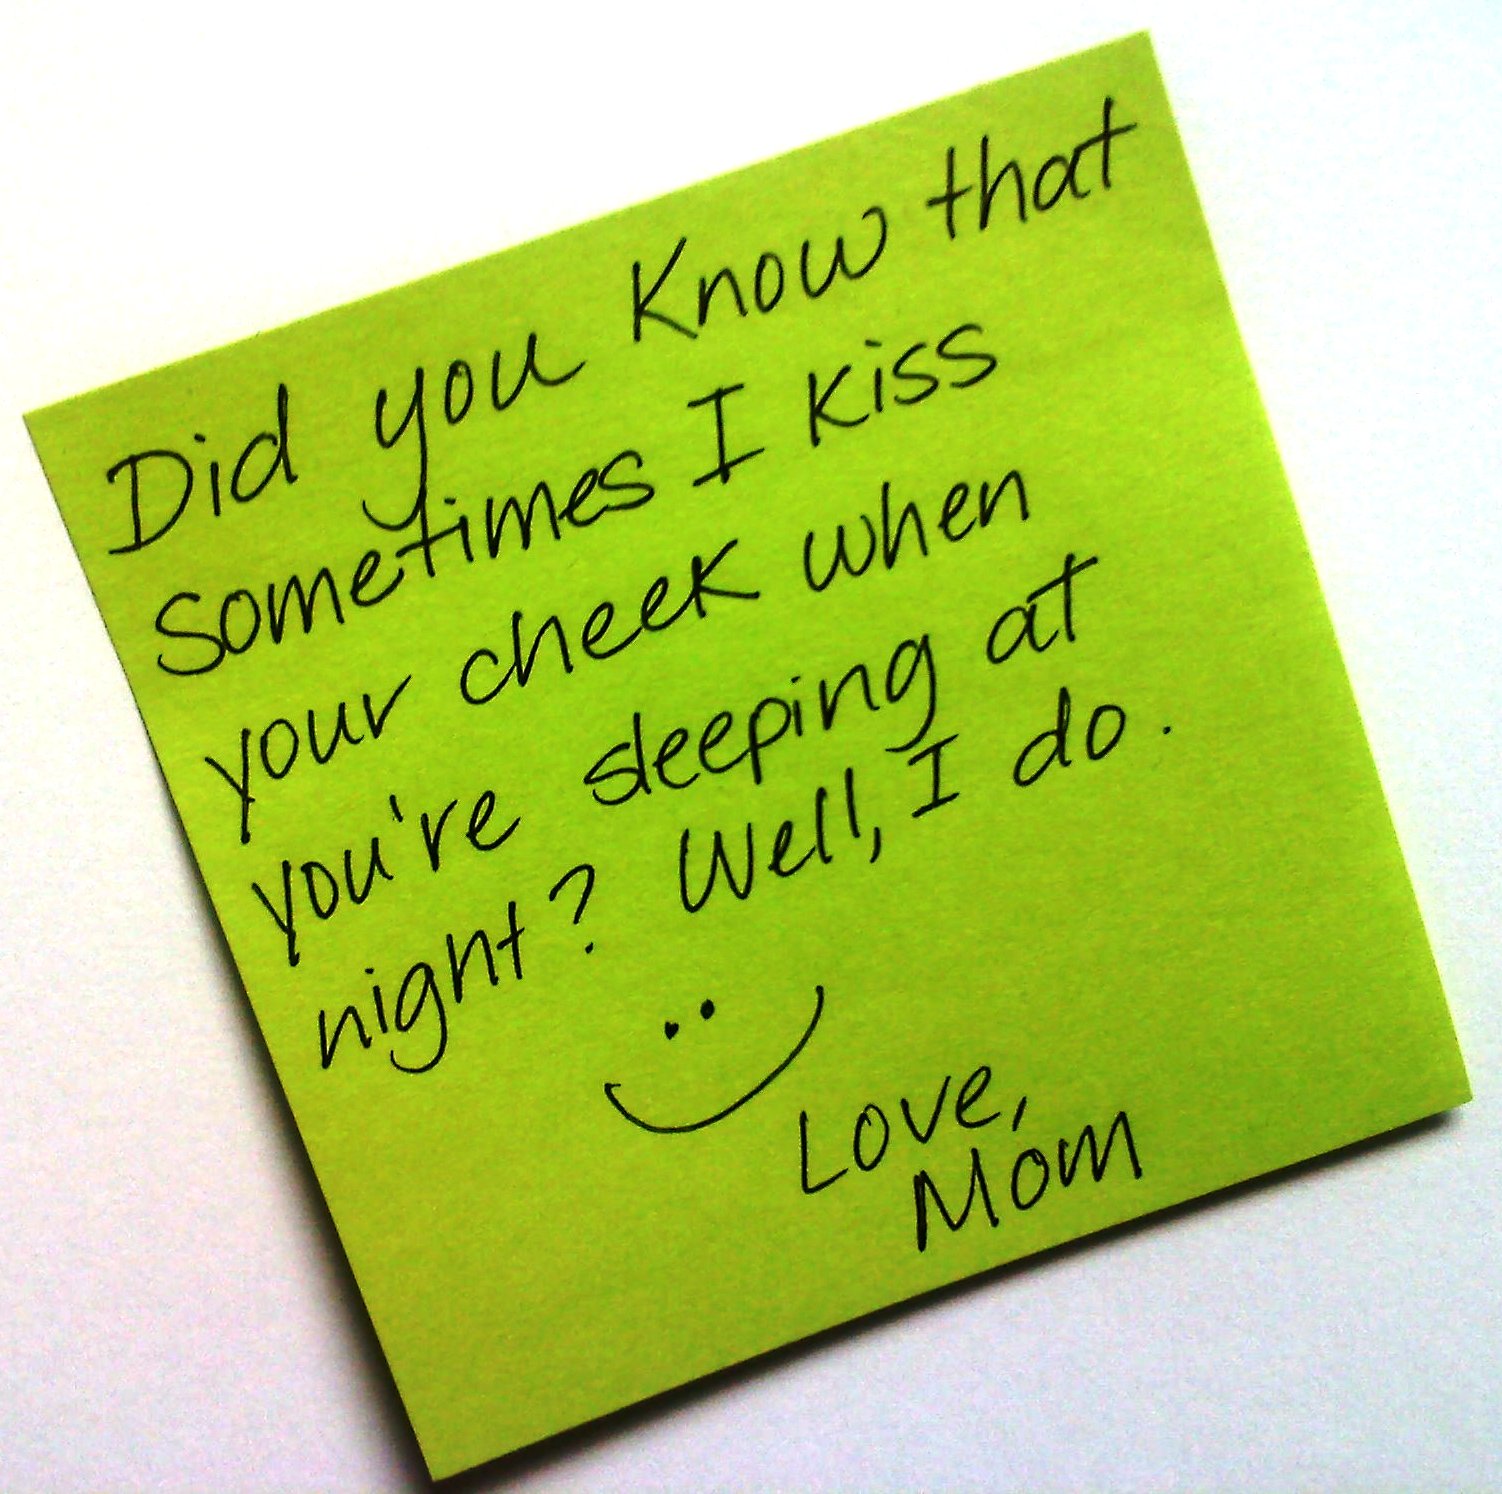 What Would You Do with a Kiss Note?